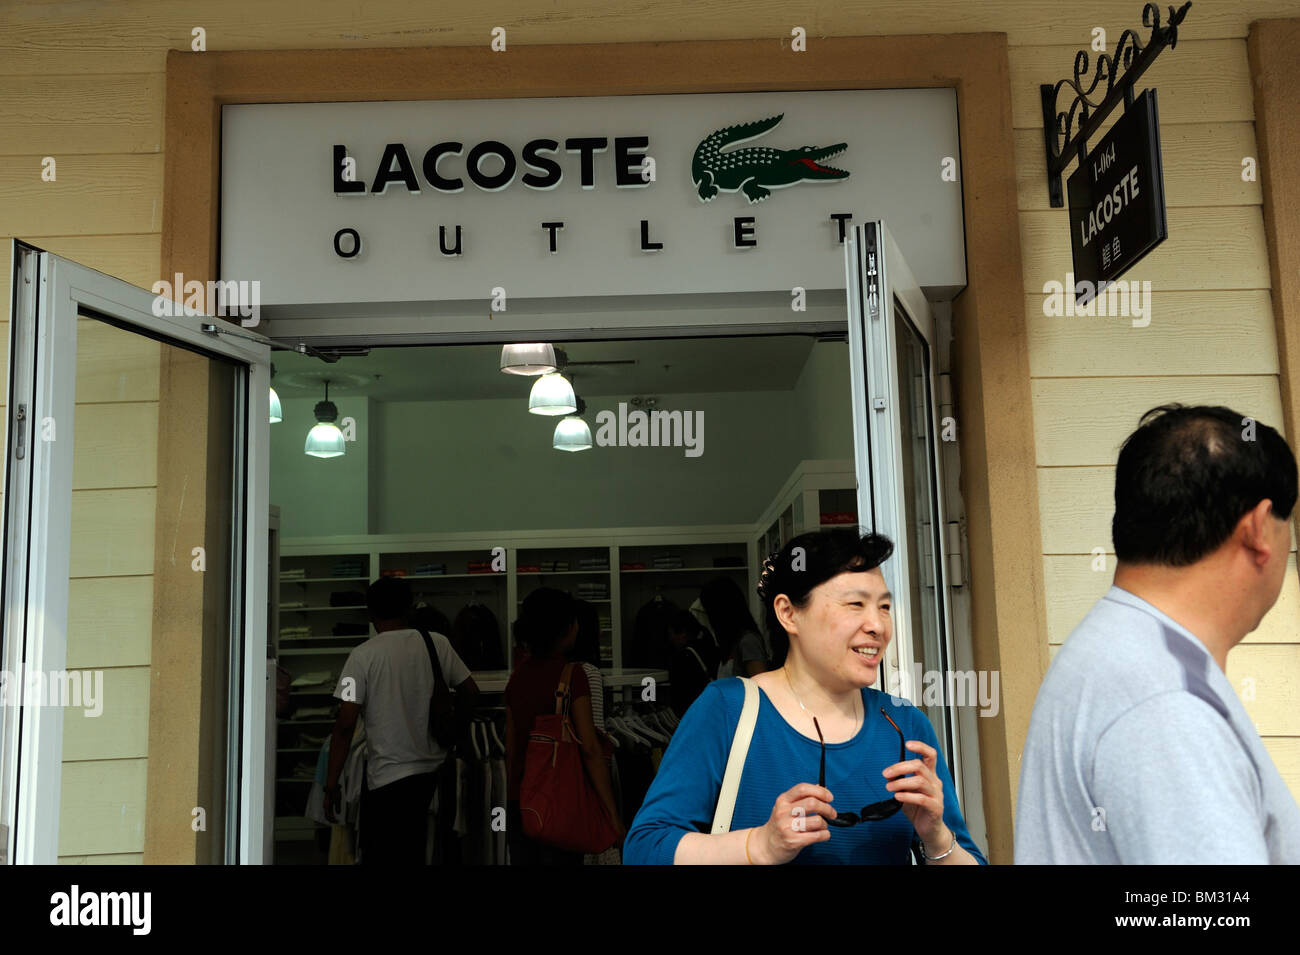 lacoste outlet store